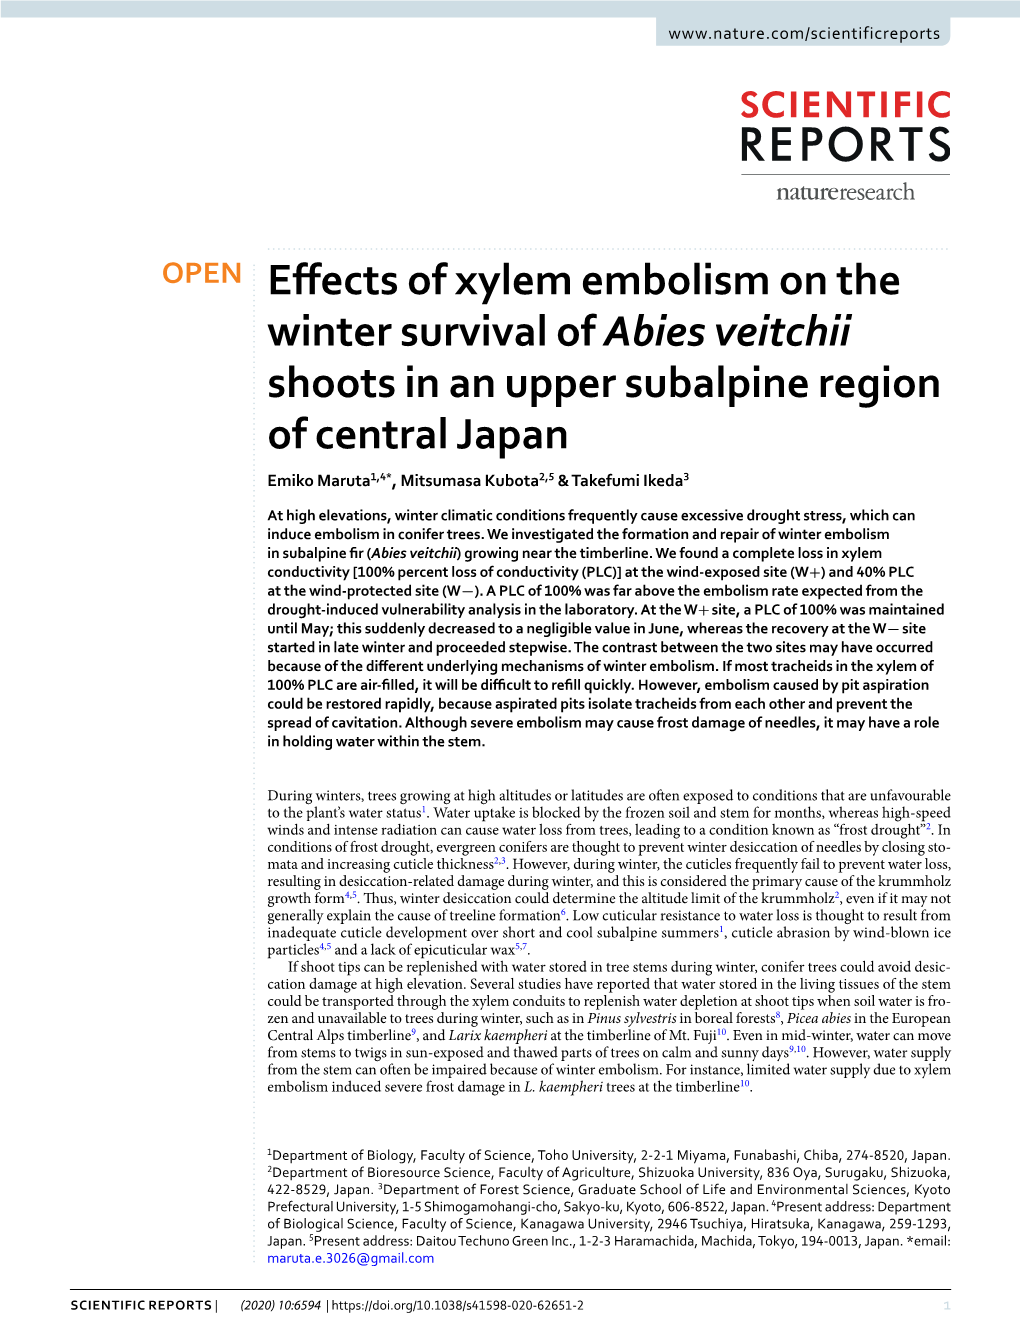 Effects of Xylem Embolism on the Winter Survival of Abies Veitchii Shoots in an Upper Subalpine Region of Central Japan